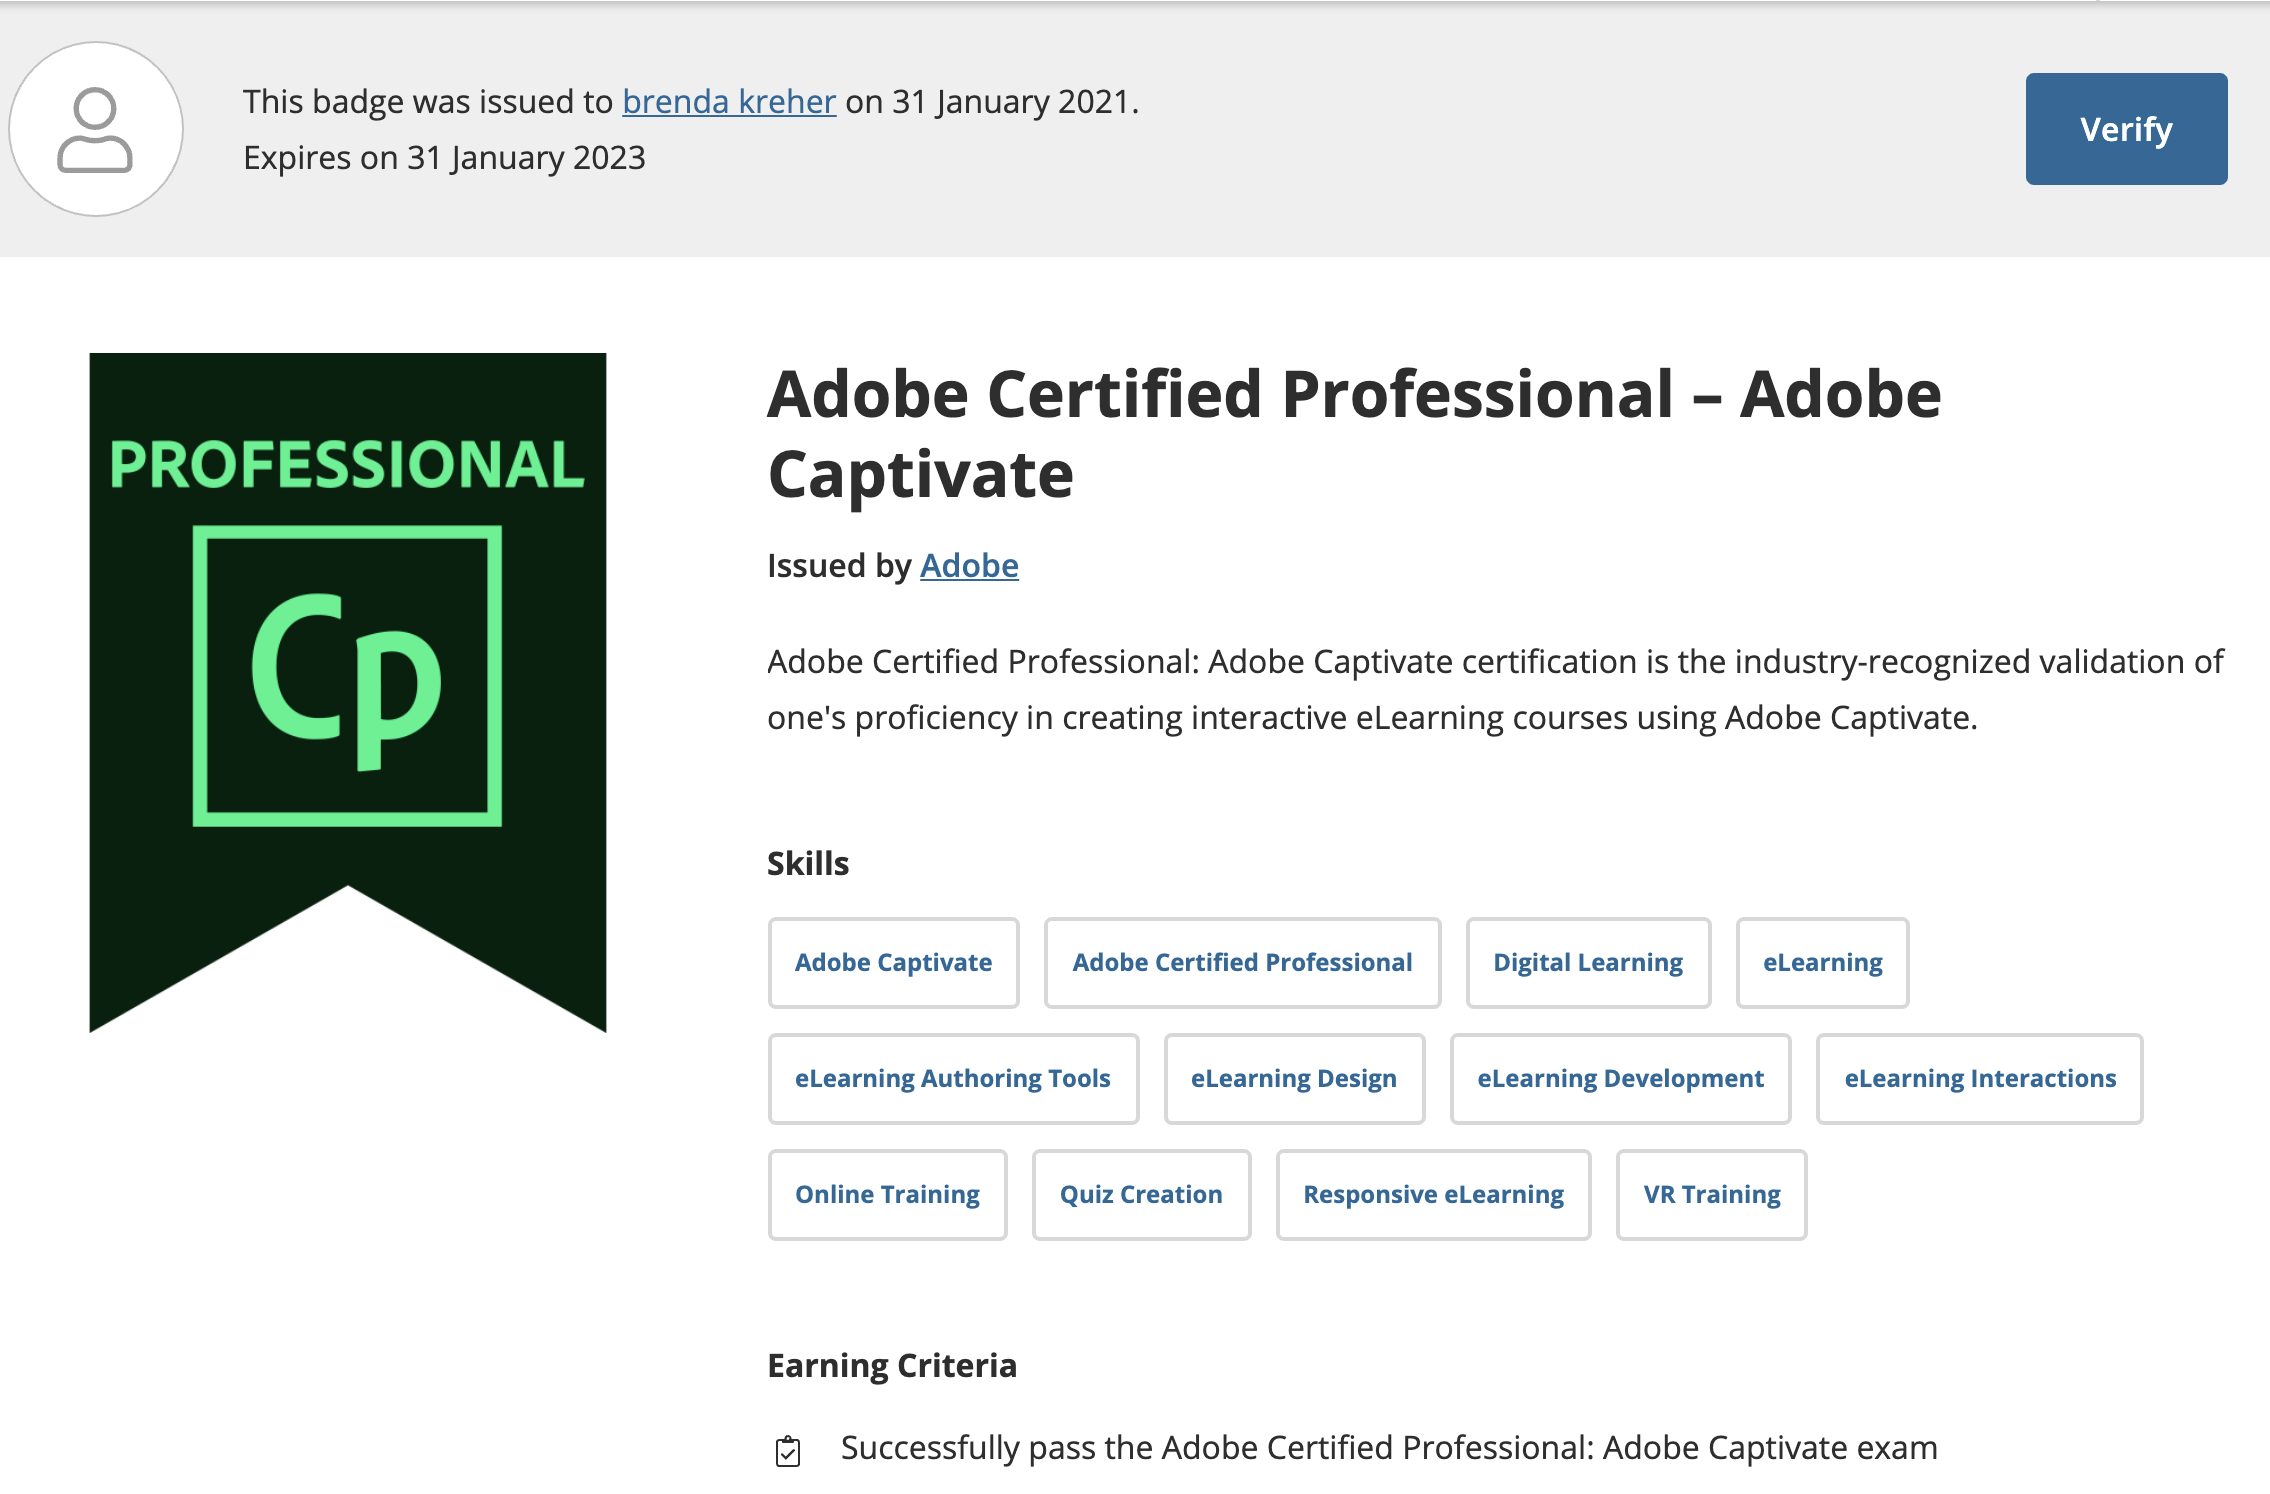 Adobe Certified Professional: Adobe Captivate official verified certificate for Yin Kreher. She is certified in various elearning skills, including elearning authoring, responsive design, online training, responsive elearning, VR training.